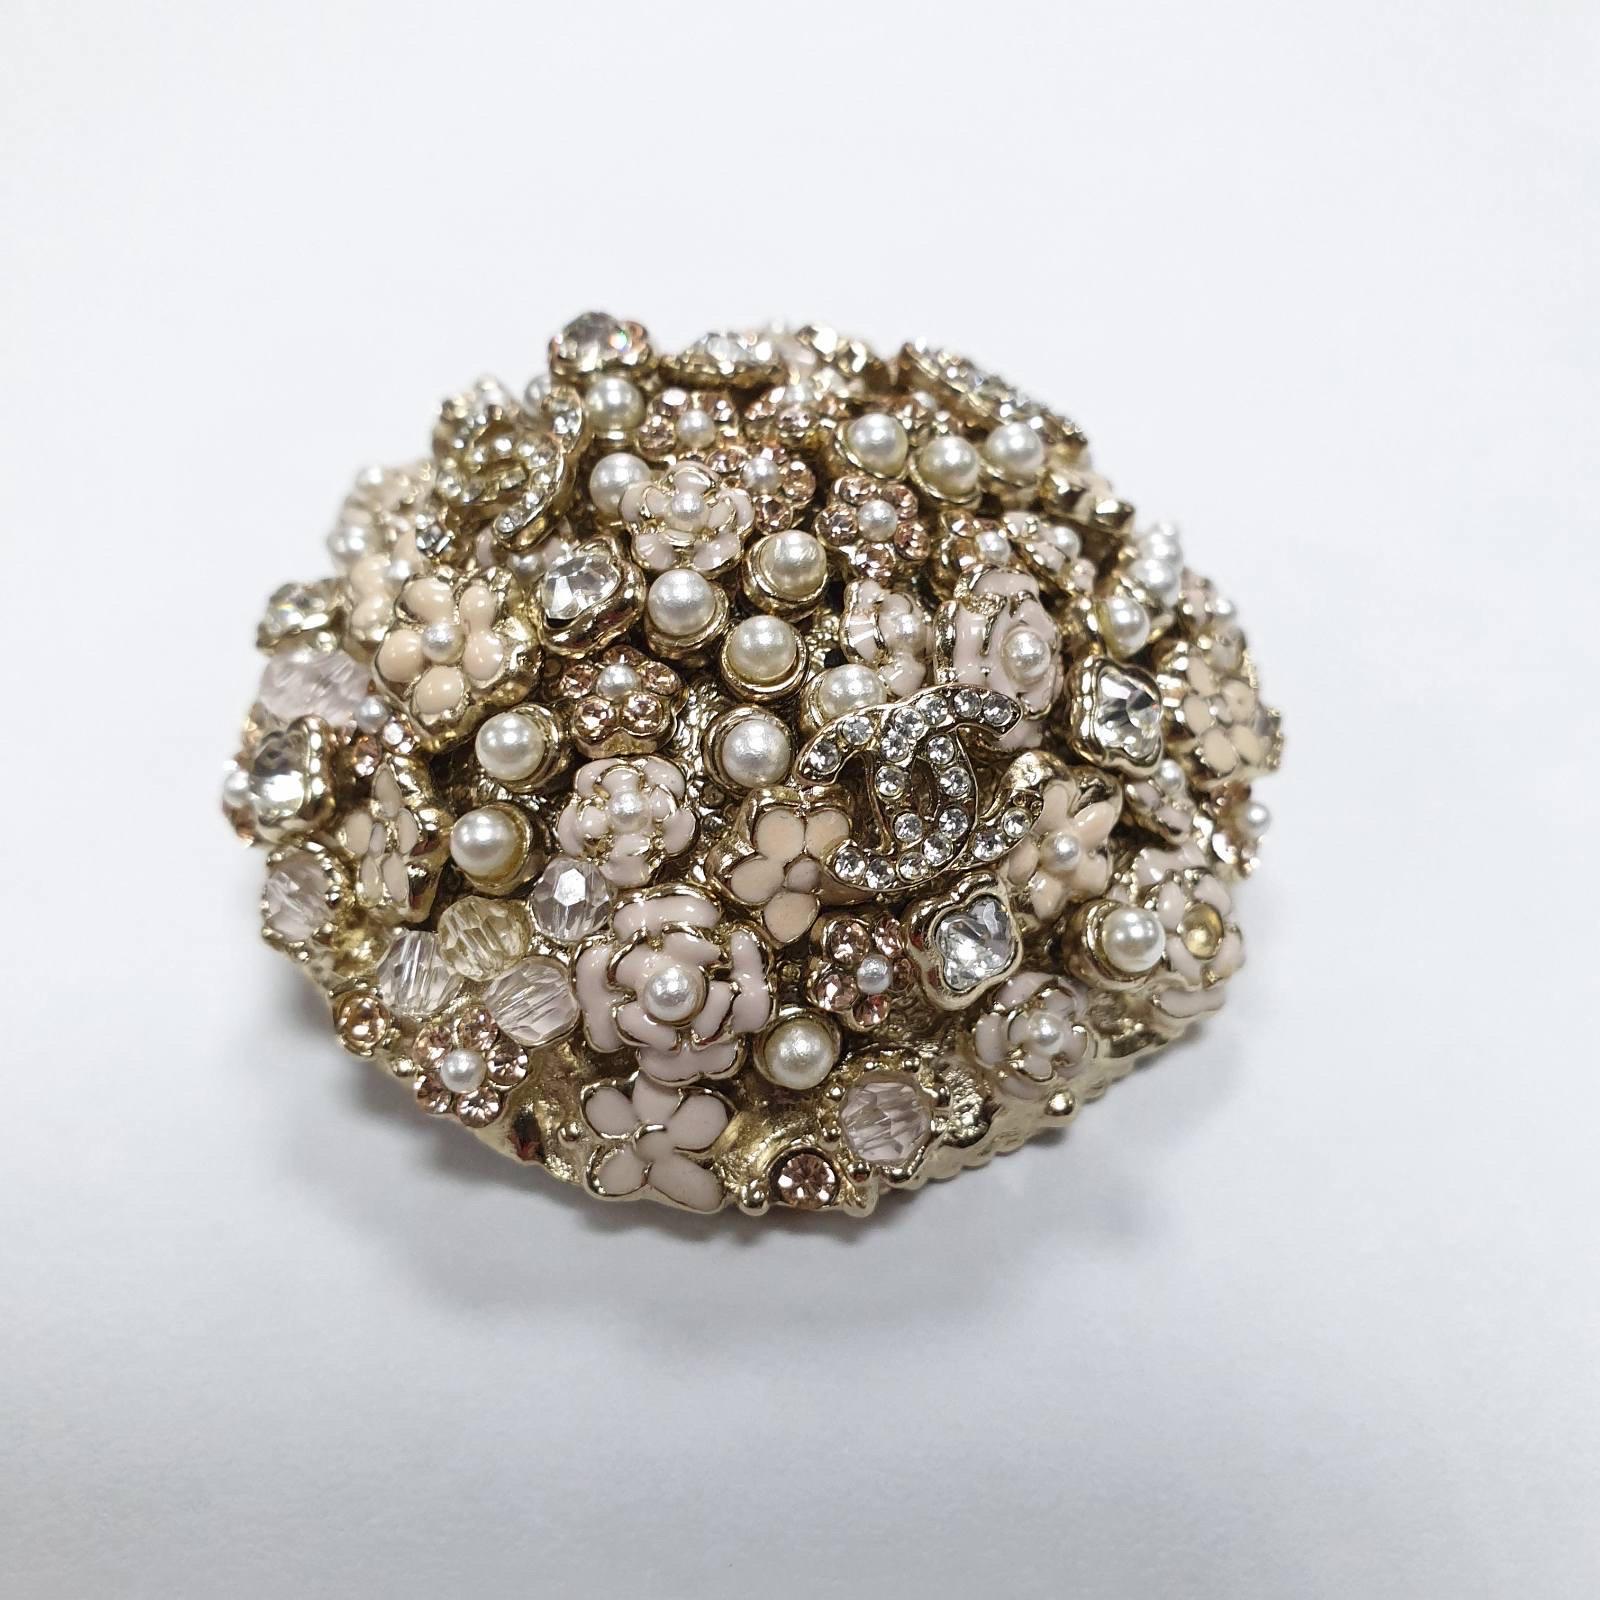 Chanel 11A Round Faux Pearls Brooch In Good Condition For Sale In Krakow, PL